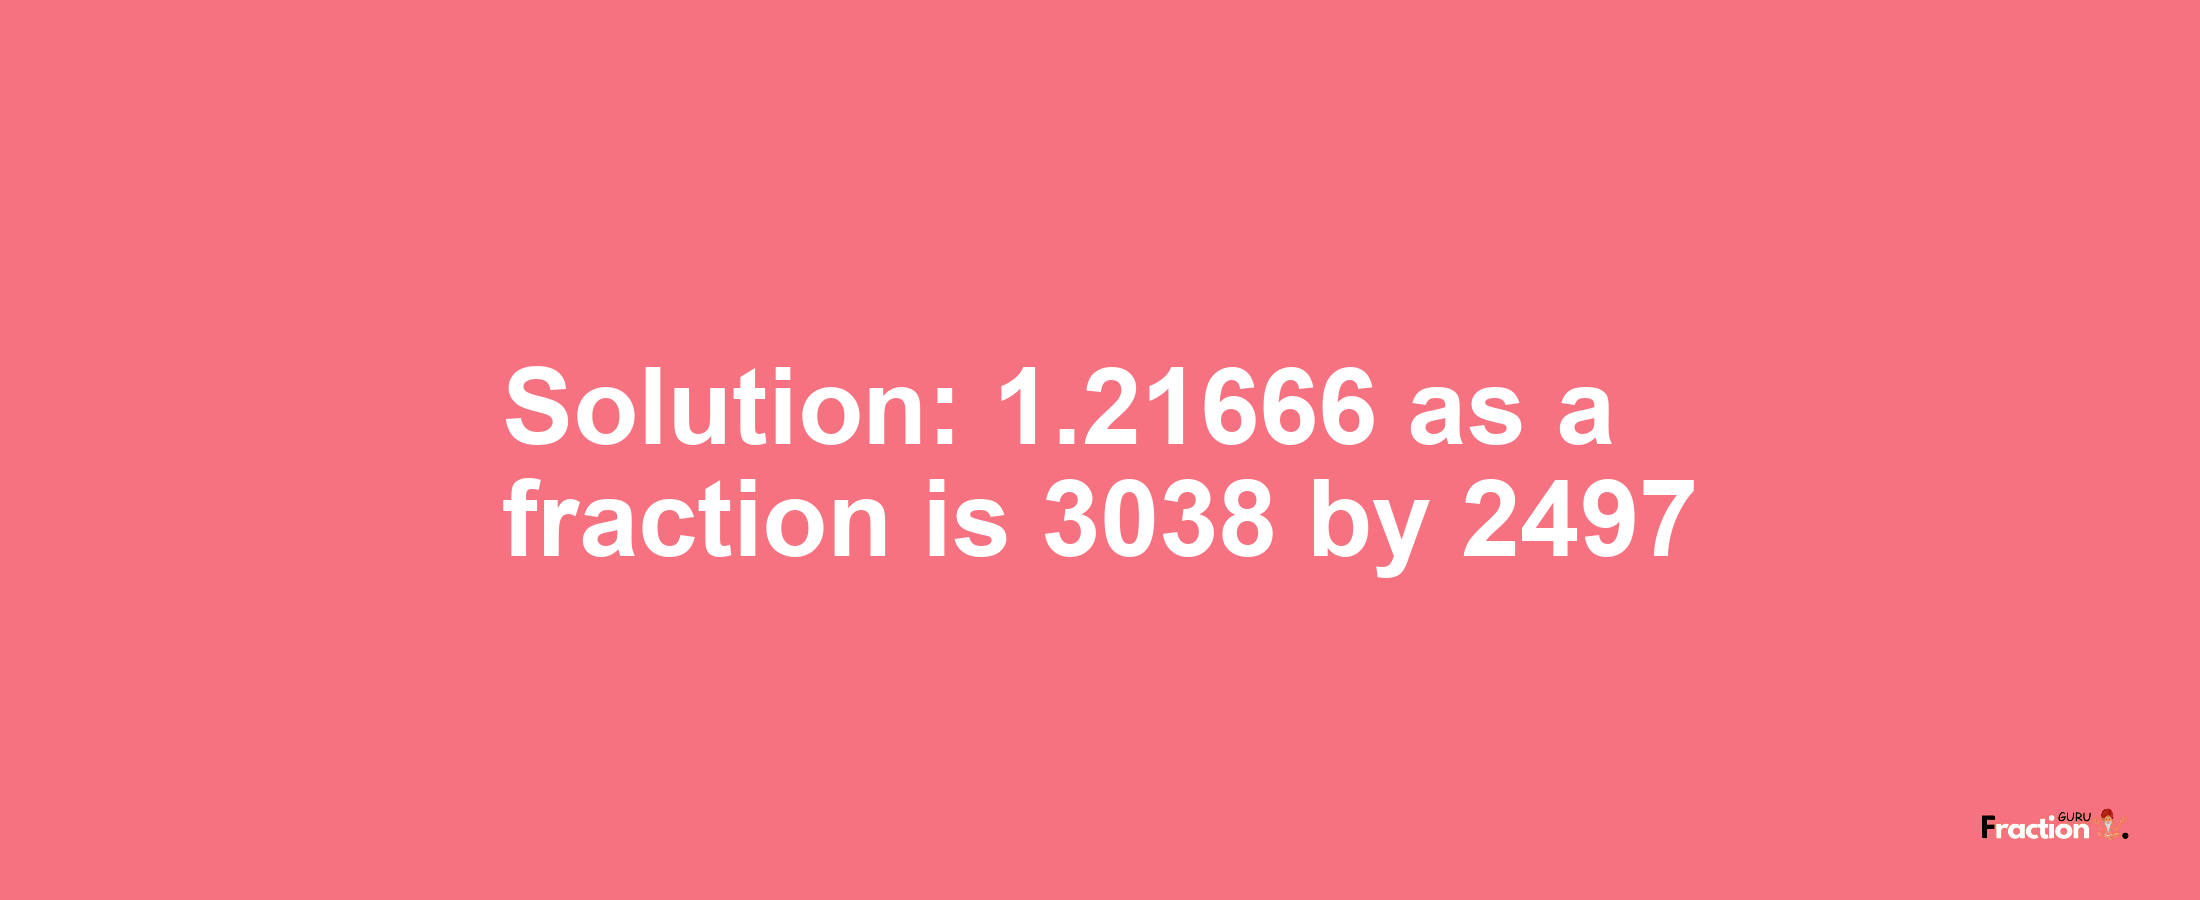 Solution:1.21666 as a fraction is 3038/2497